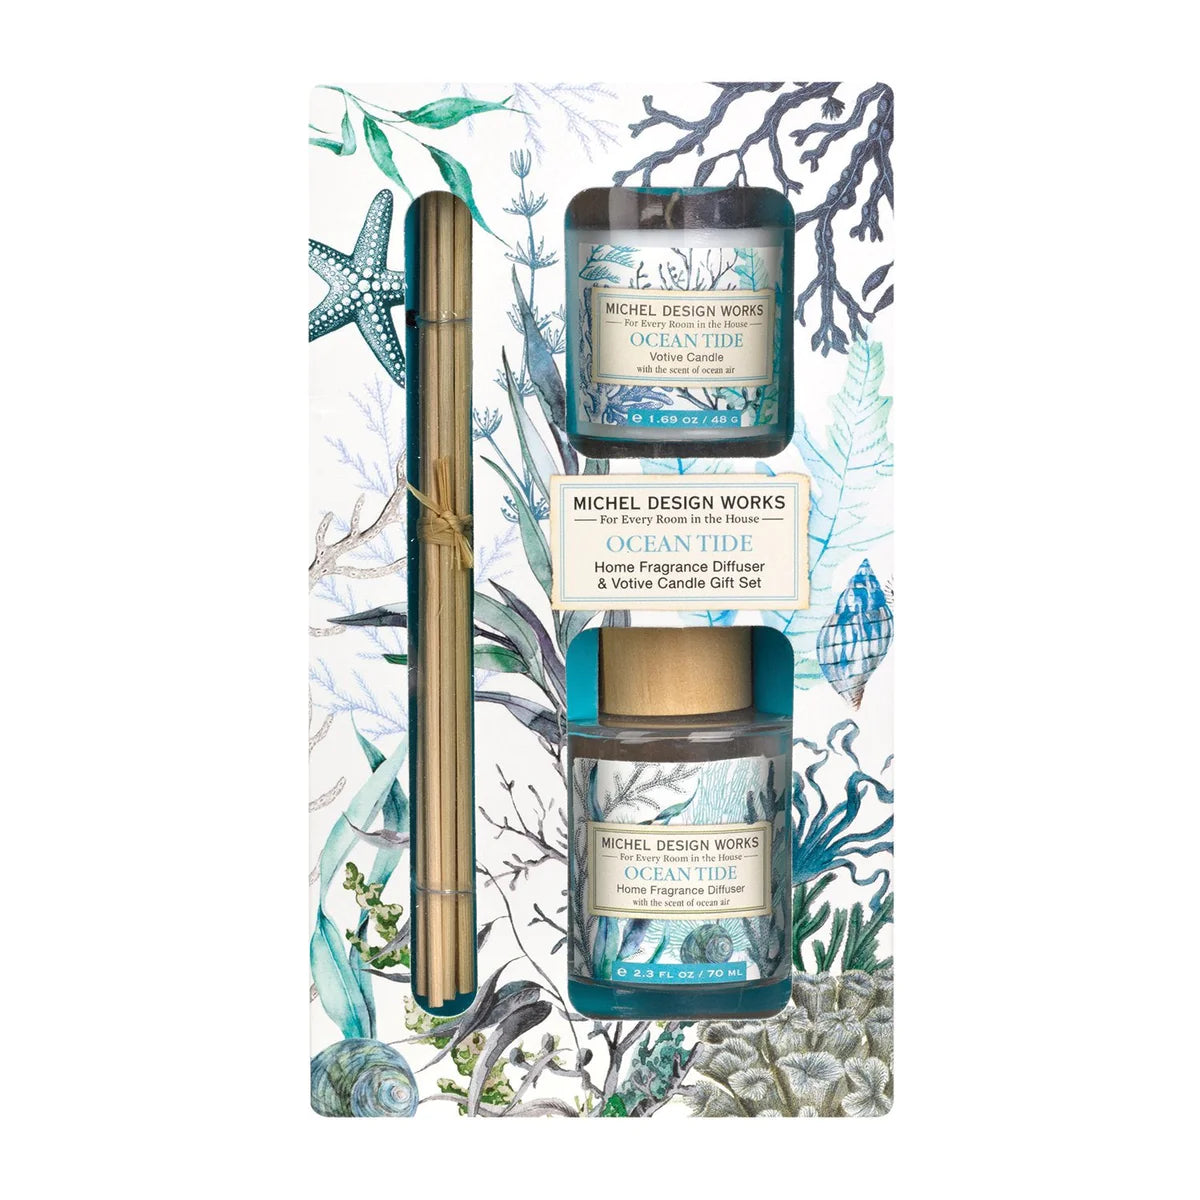 Ocean tide Home Fragrance Diffuser &amp; Votive Candle Gift Set - Zinnias Gift Boutique